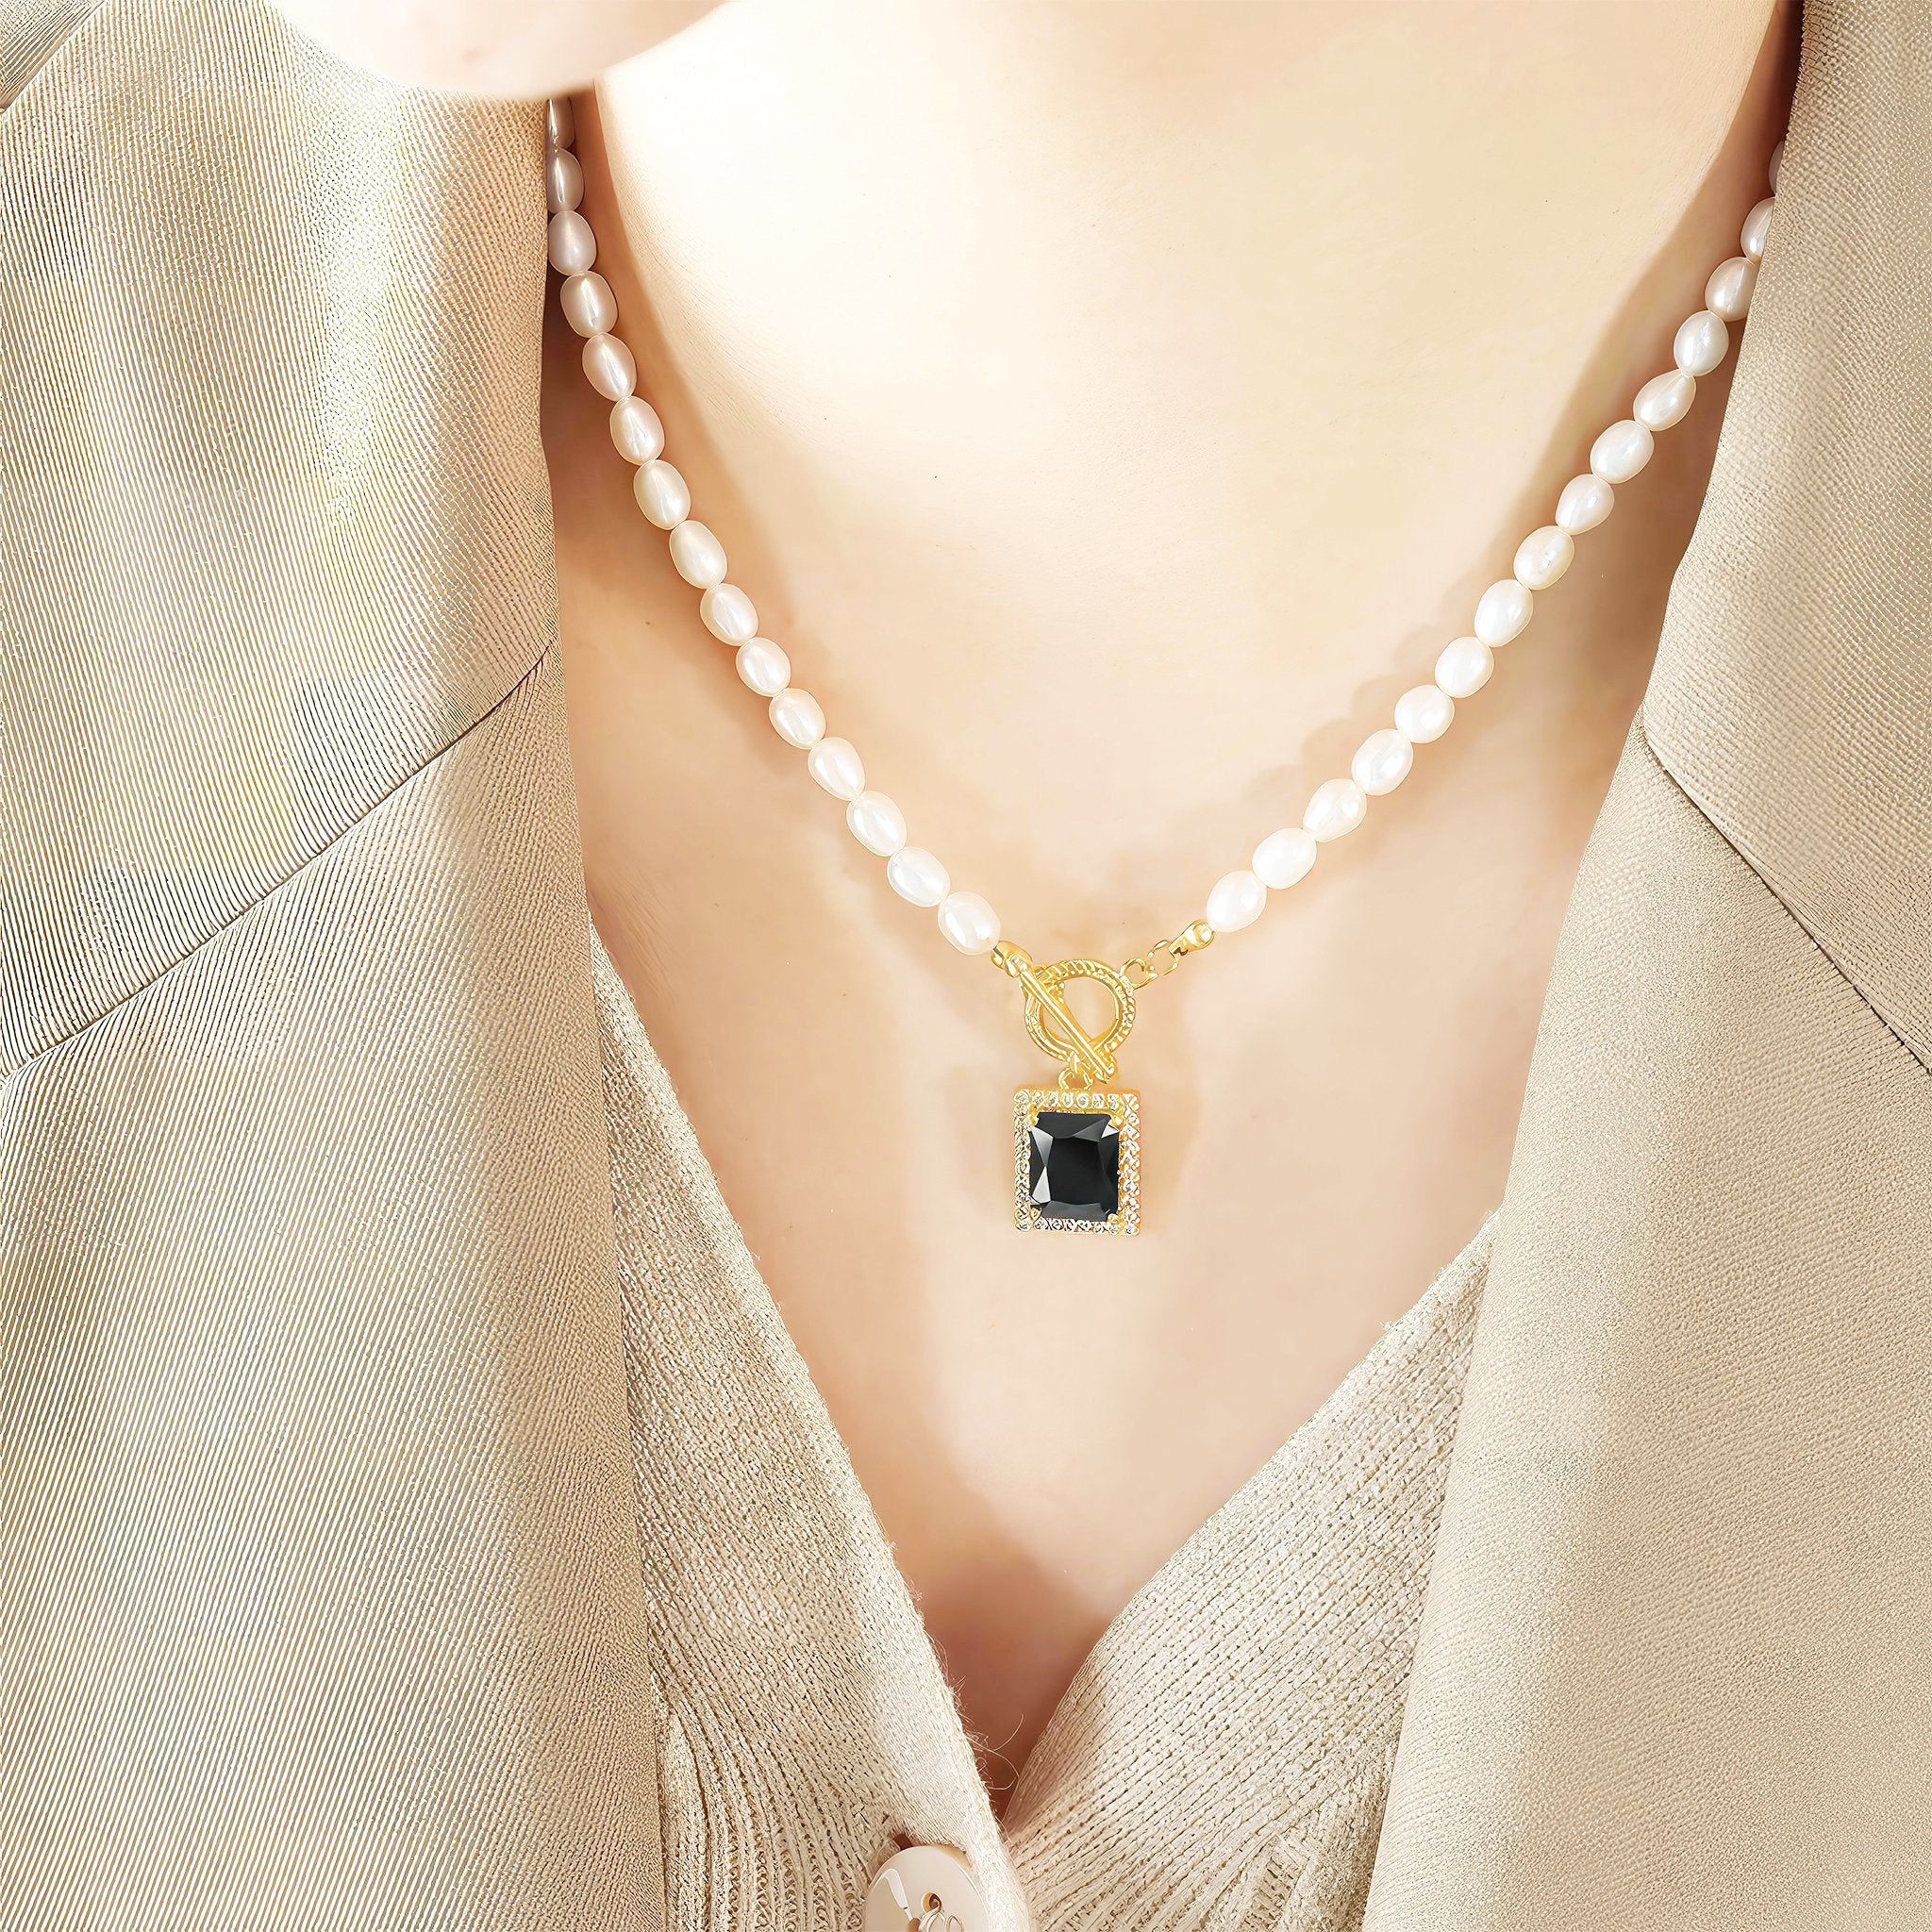 Pearl Chain Necklace with Square Gem Pendant - Nobbier - Necklace - 18K Gold And Titanium PVD Coated Jewelry